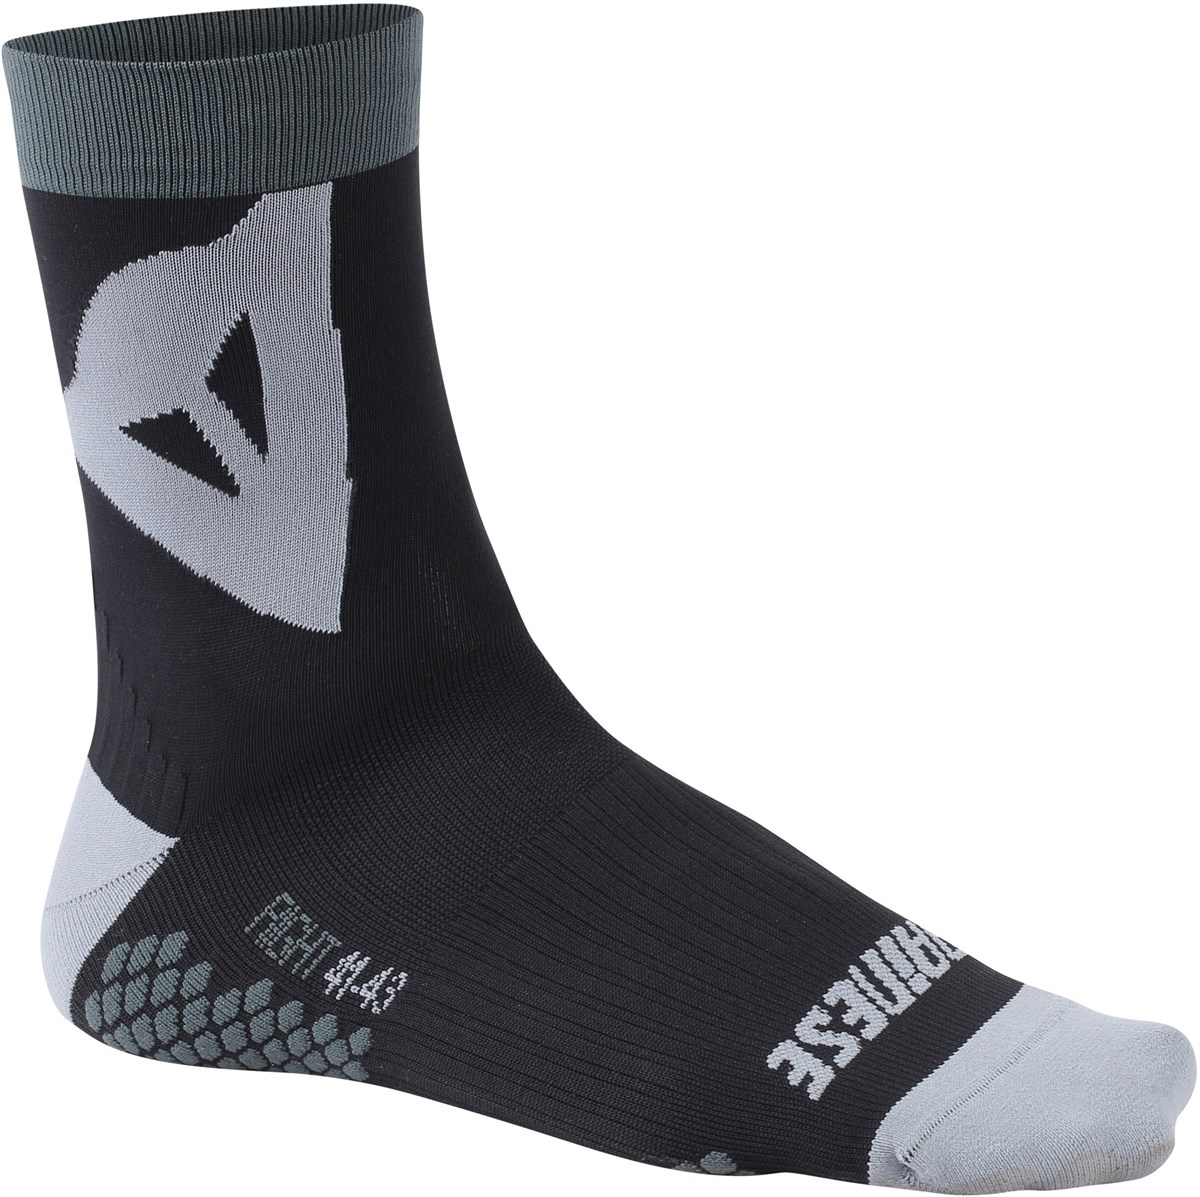 Dainese Riding Socks MED product image